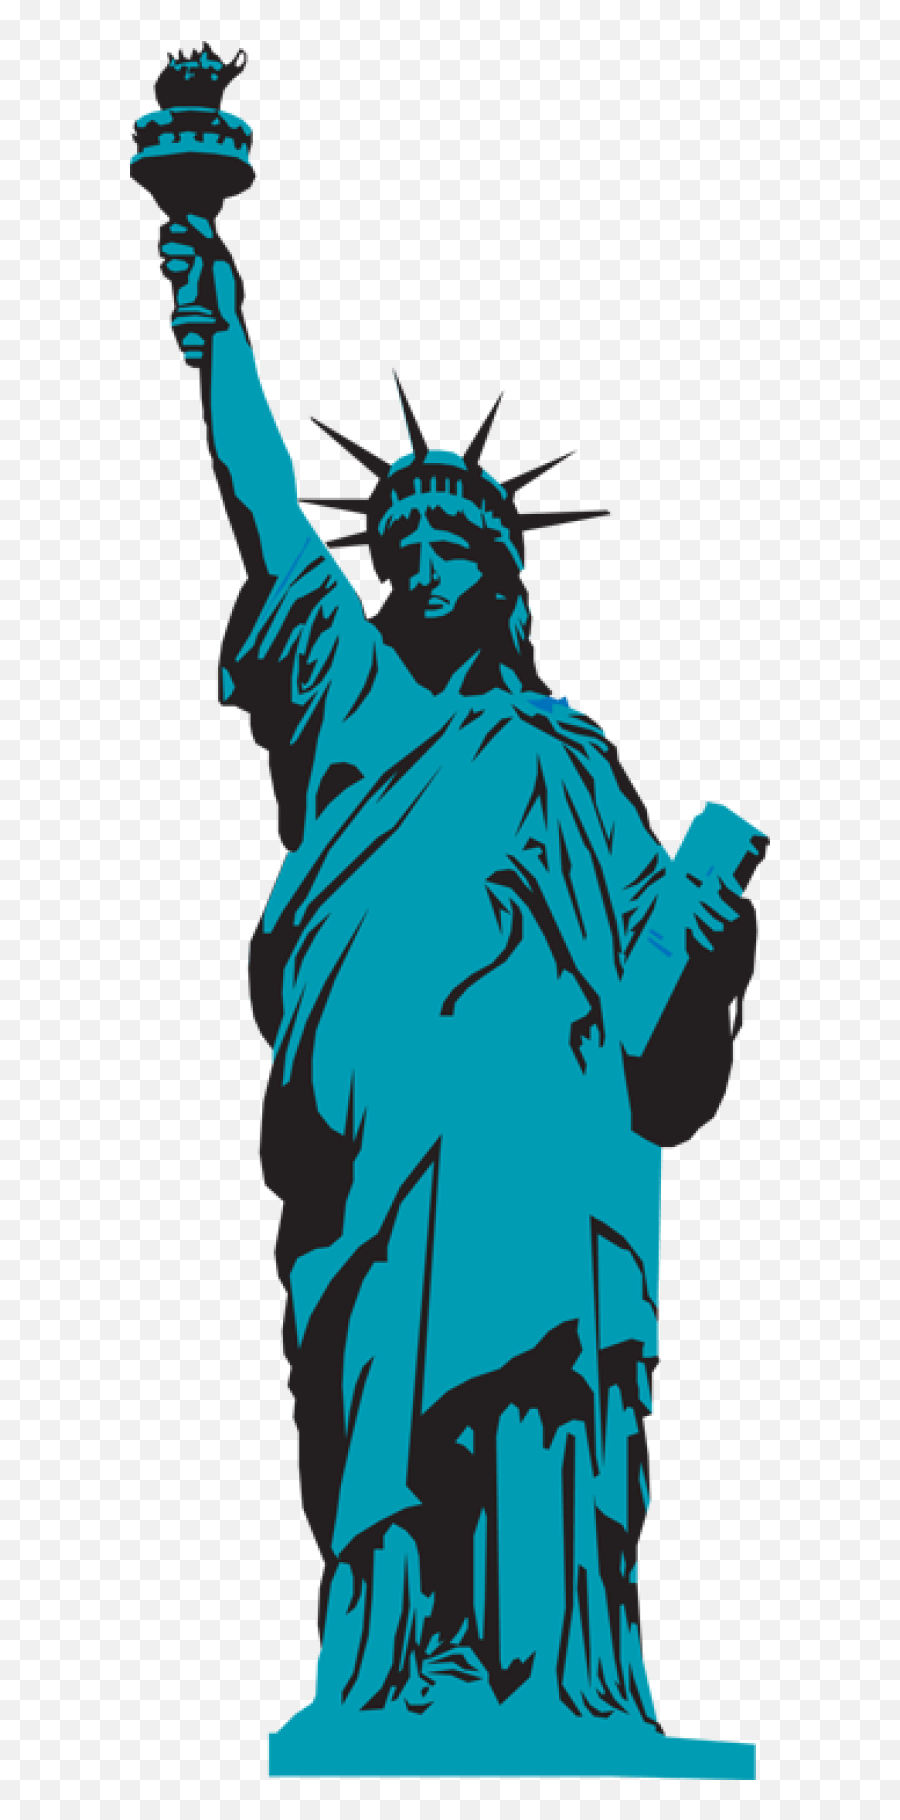 Statue Of Liberty Clip Art Drawing Free - Illustration Statue Of Liberty Graphic Emoji,Statue Of Liberty Clipart